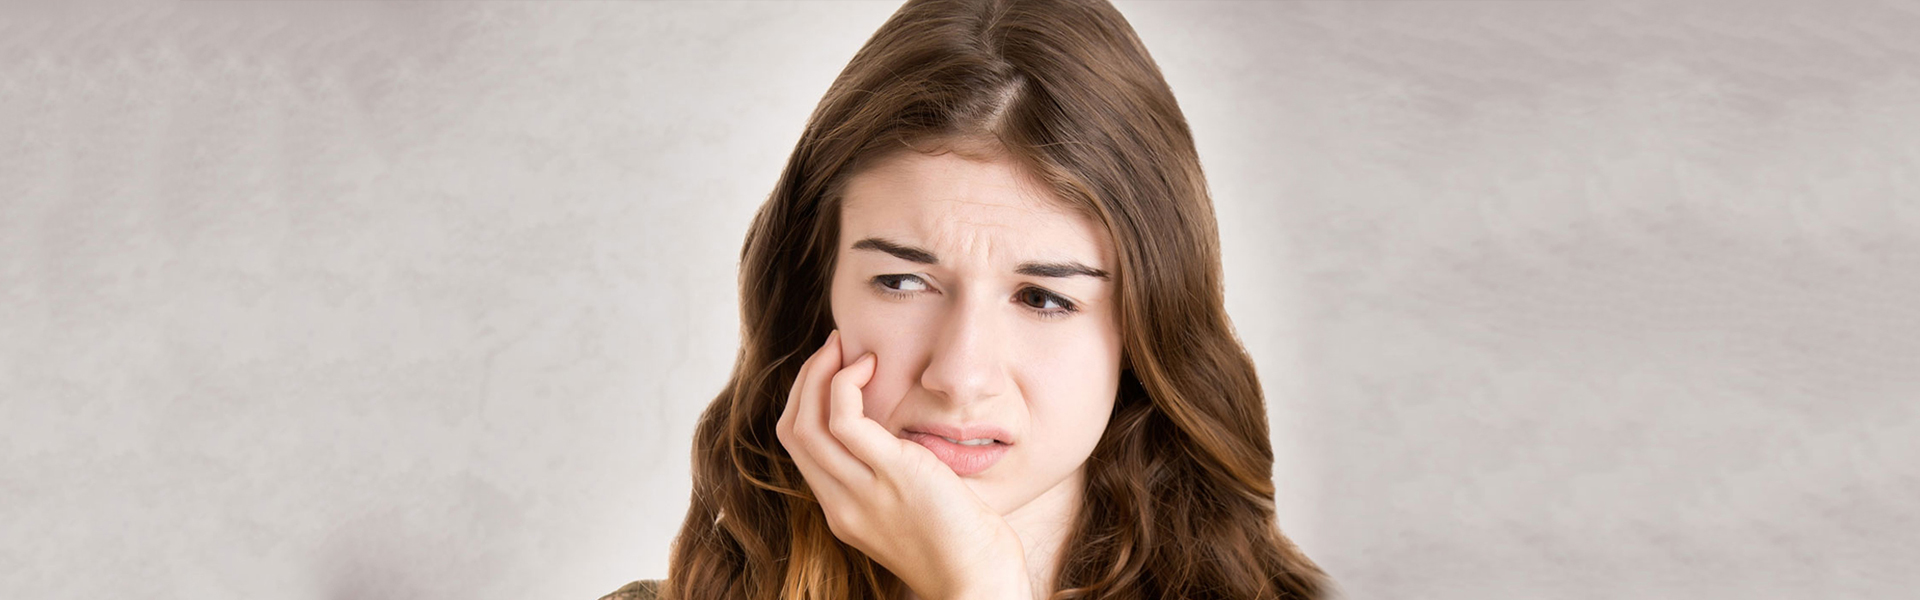 What’s the cause of your toothache?